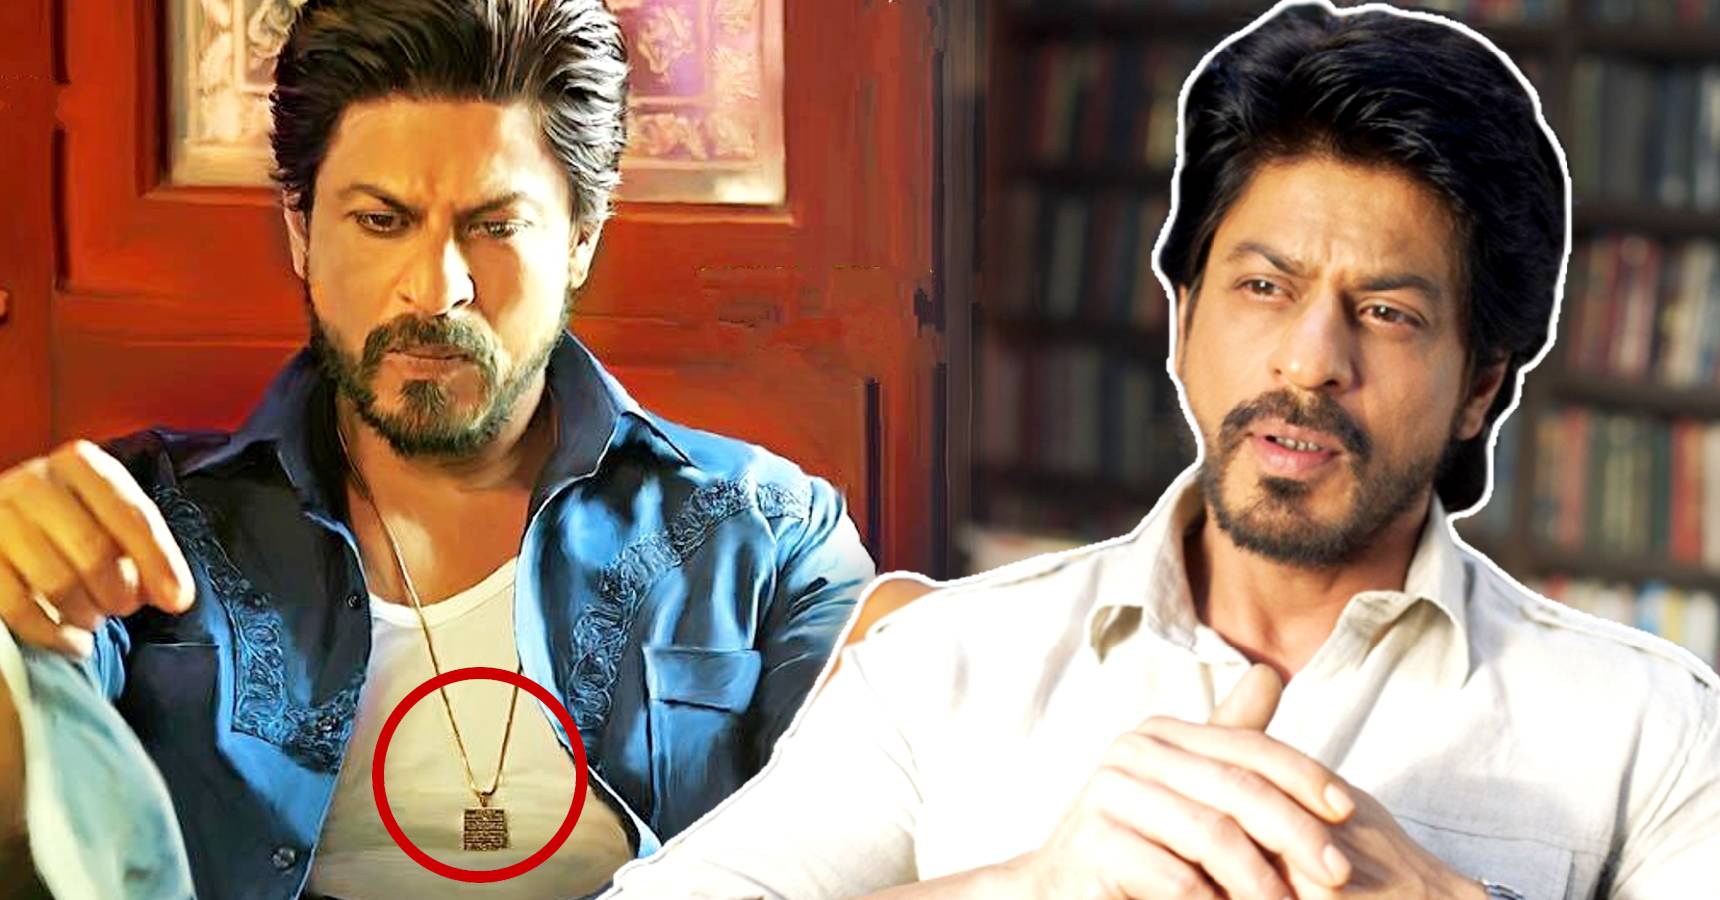 When Bollywood actor Shah Rukh Khan showed his gold locket featuring his parents’ picture